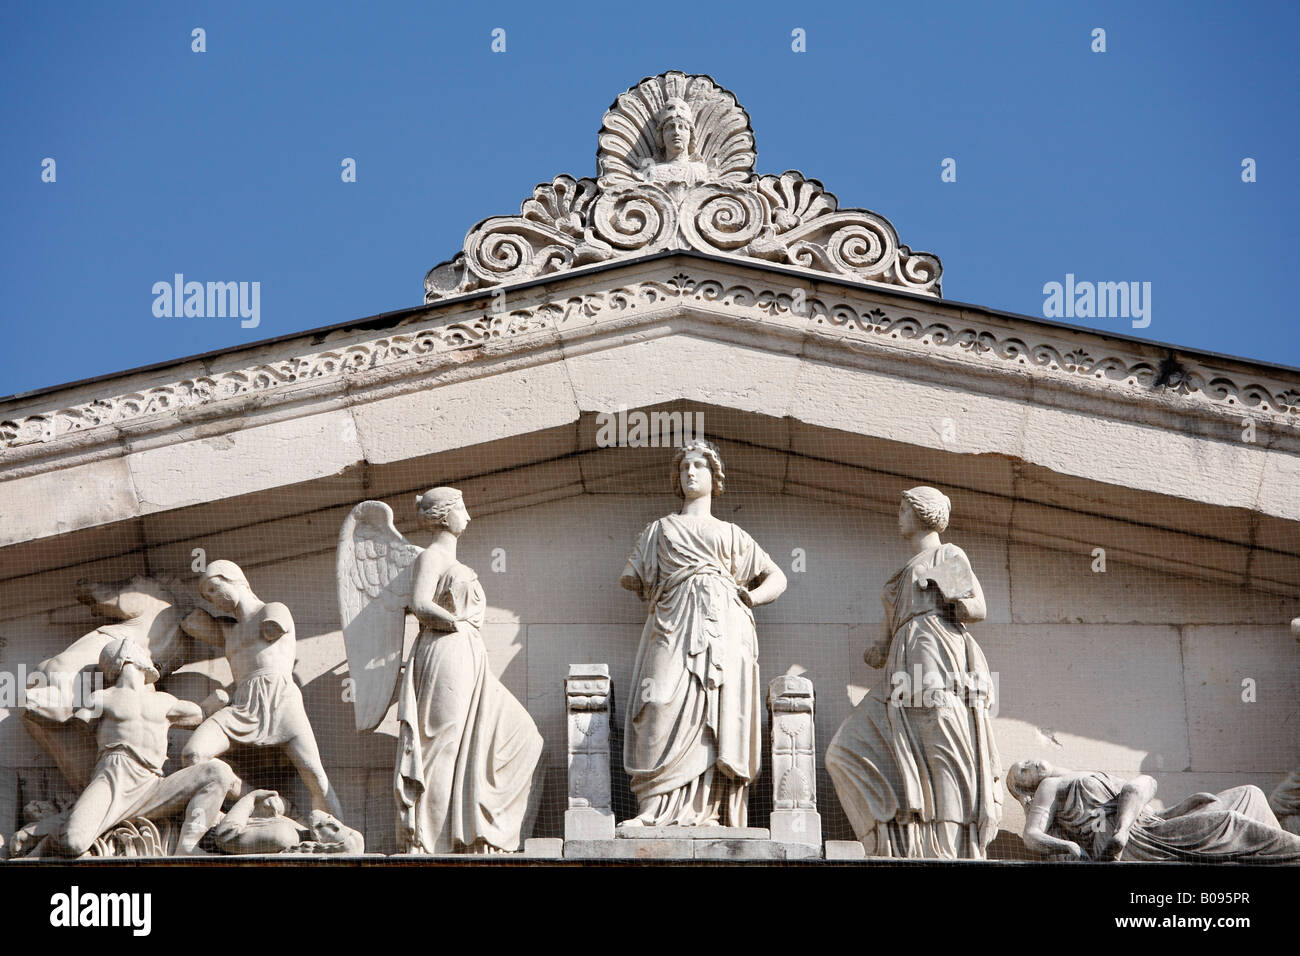 Detail showing statues on the western facade of the Propylaea, Propylea or Propylaia at Koenigsplatz Square, Munich, Bavaria, G Stock Photo